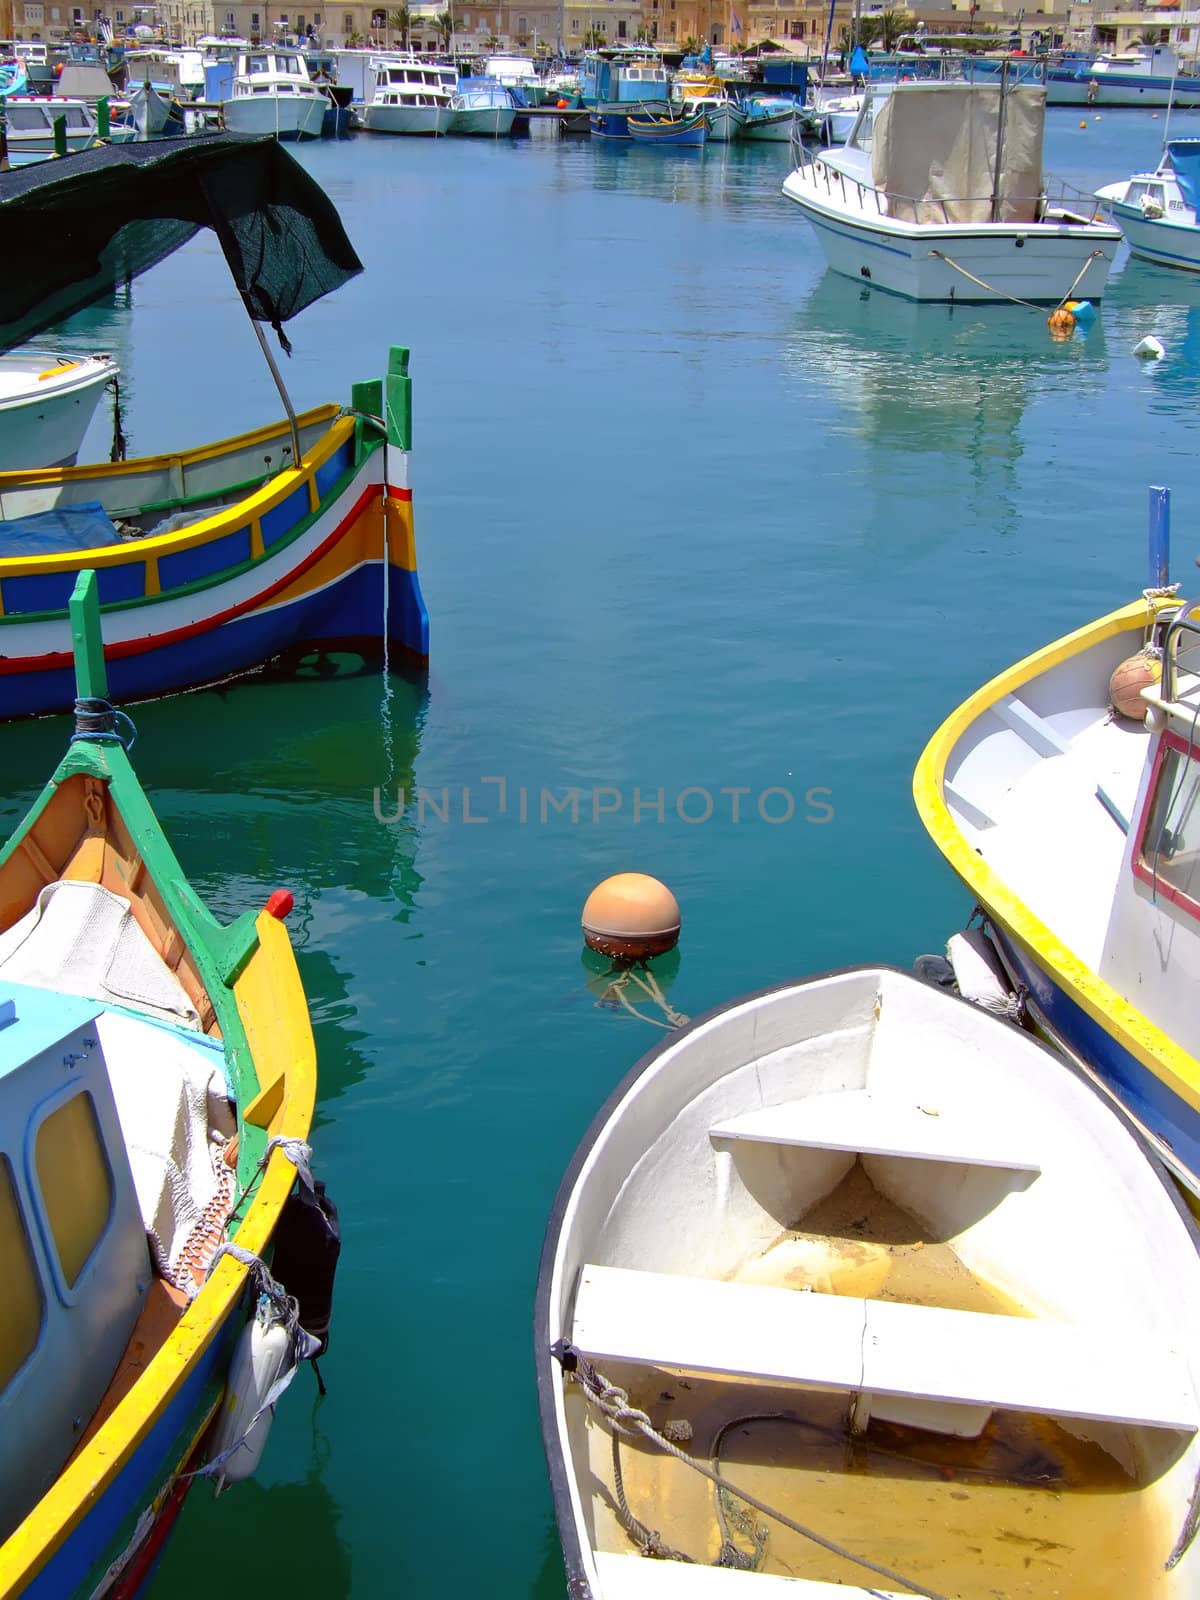 The old and tranquil fishing village of Marsaxlokk in Malta